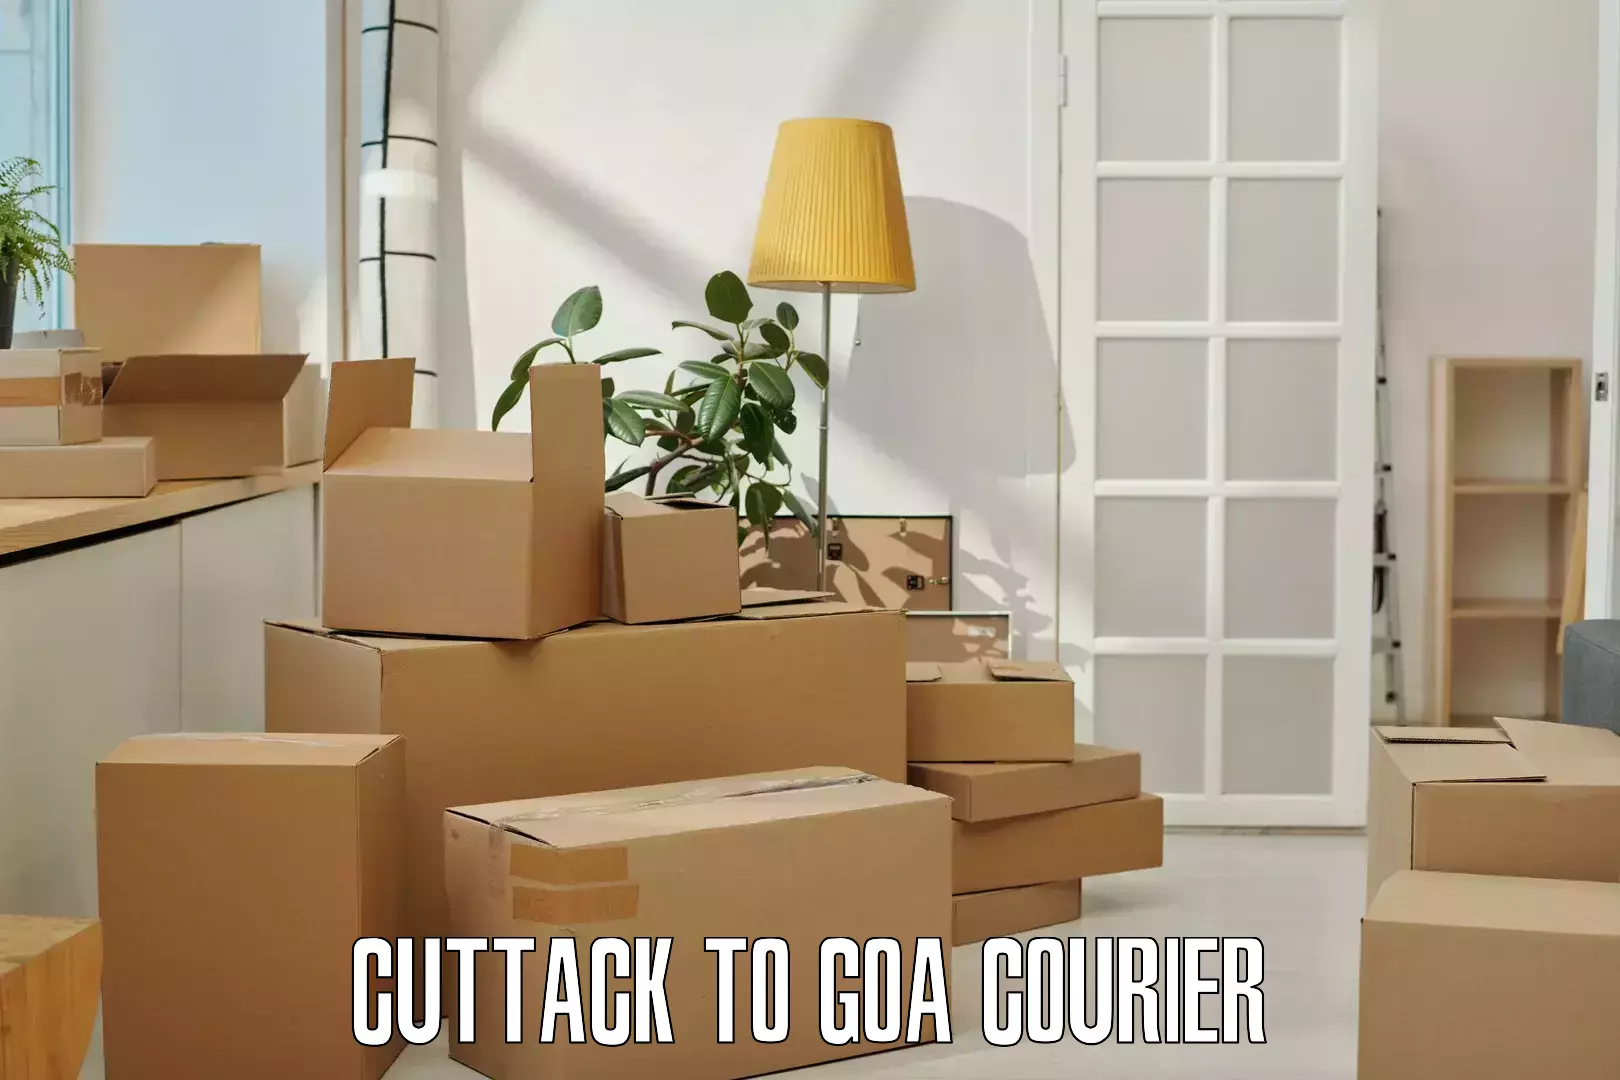 User-friendly delivery service Cuttack to Goa